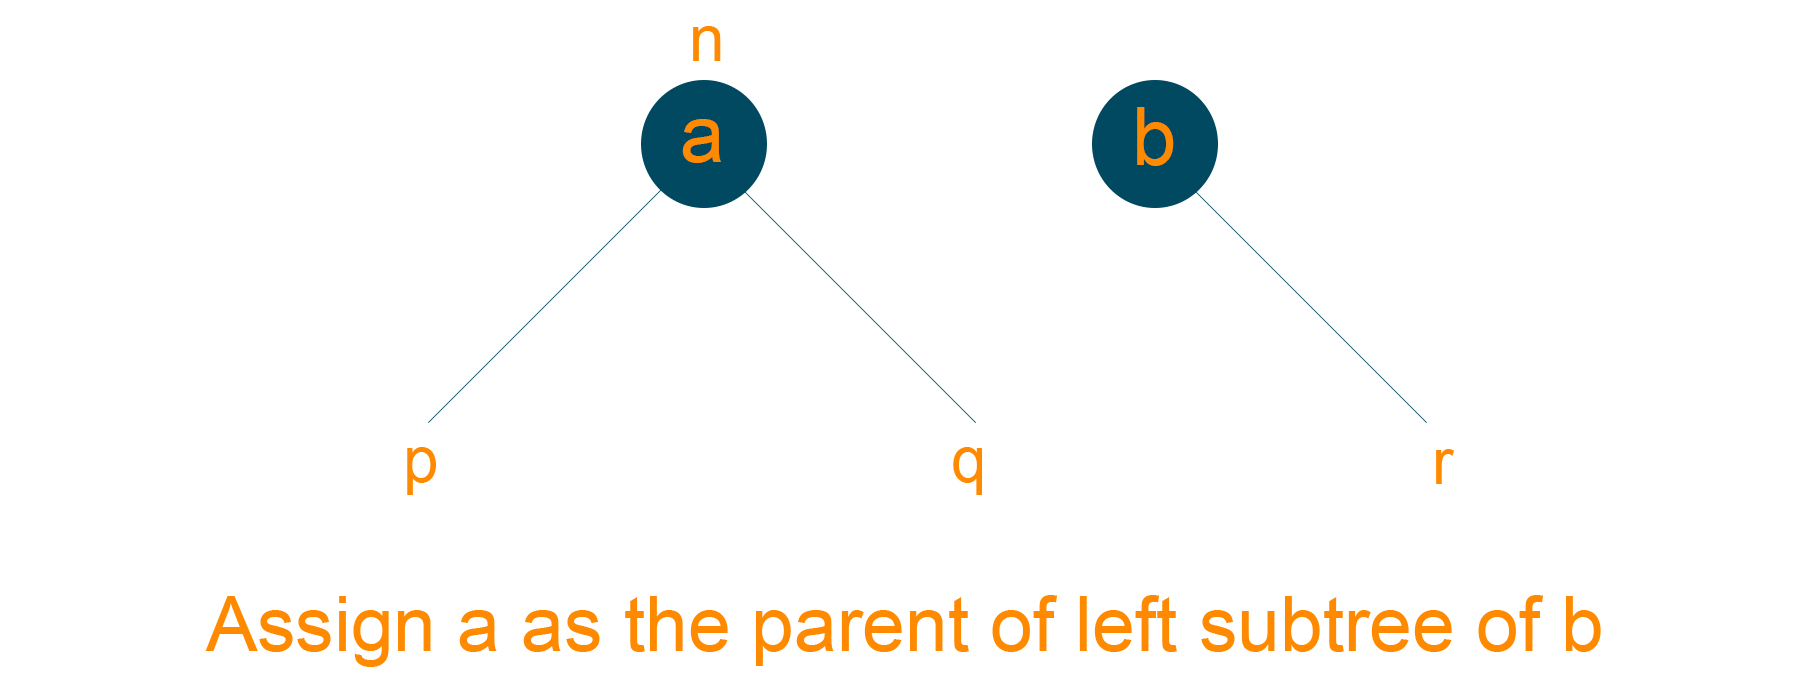 Assigning A as the parent of left subtree of B